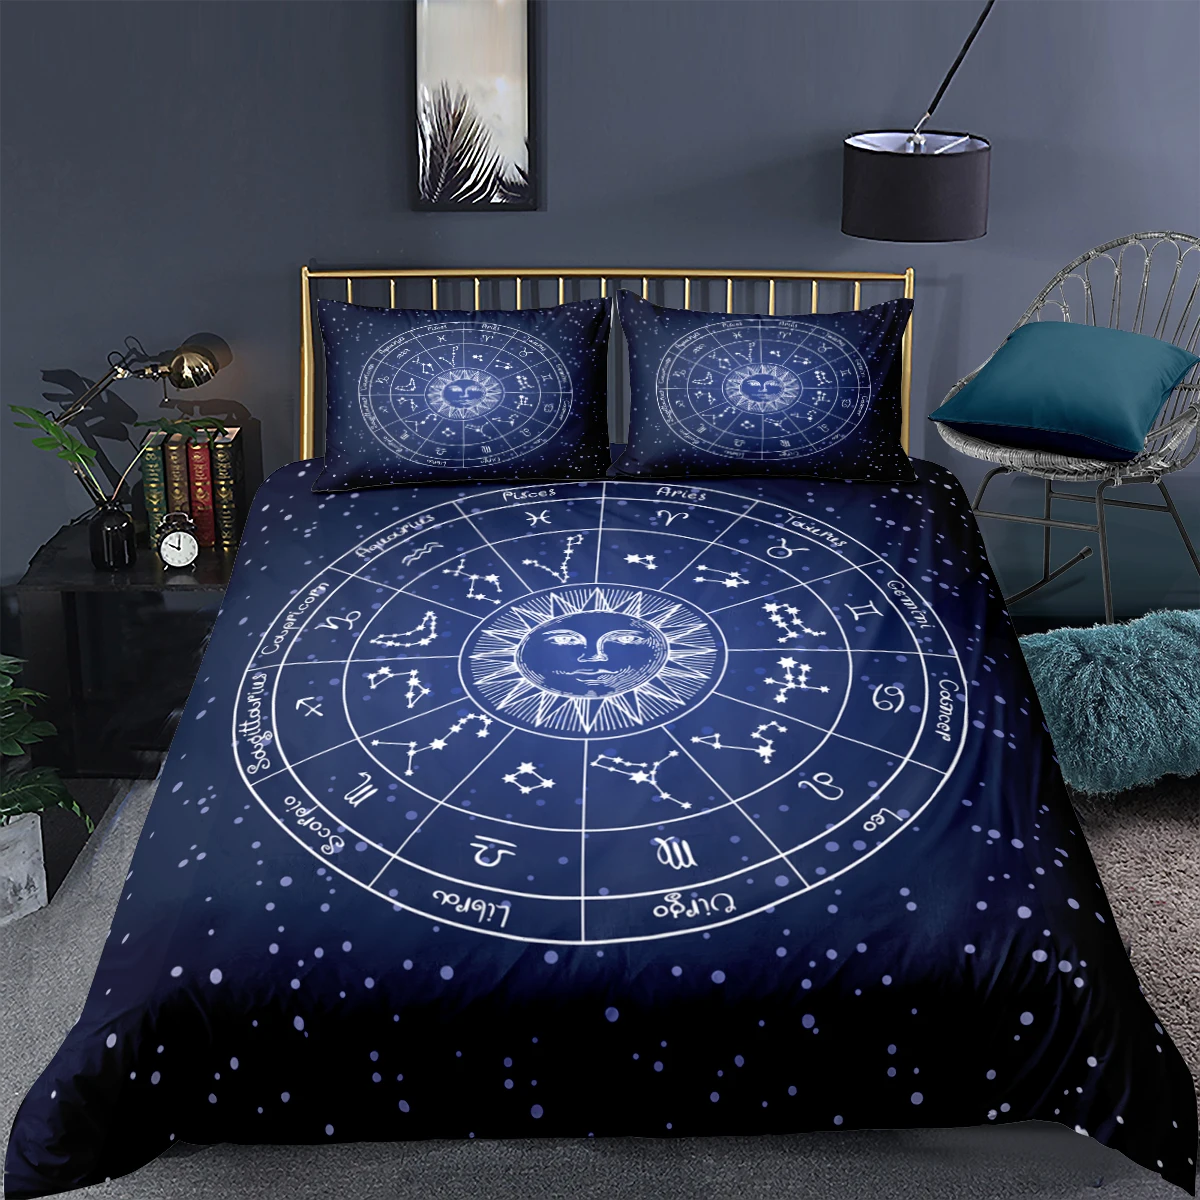 

Starry Moon Bedding Set Twelve Constellations Duvet Cover With 1/2 Pillowcase Bright Moonlight Comforter Quilt Covers Bedclothes